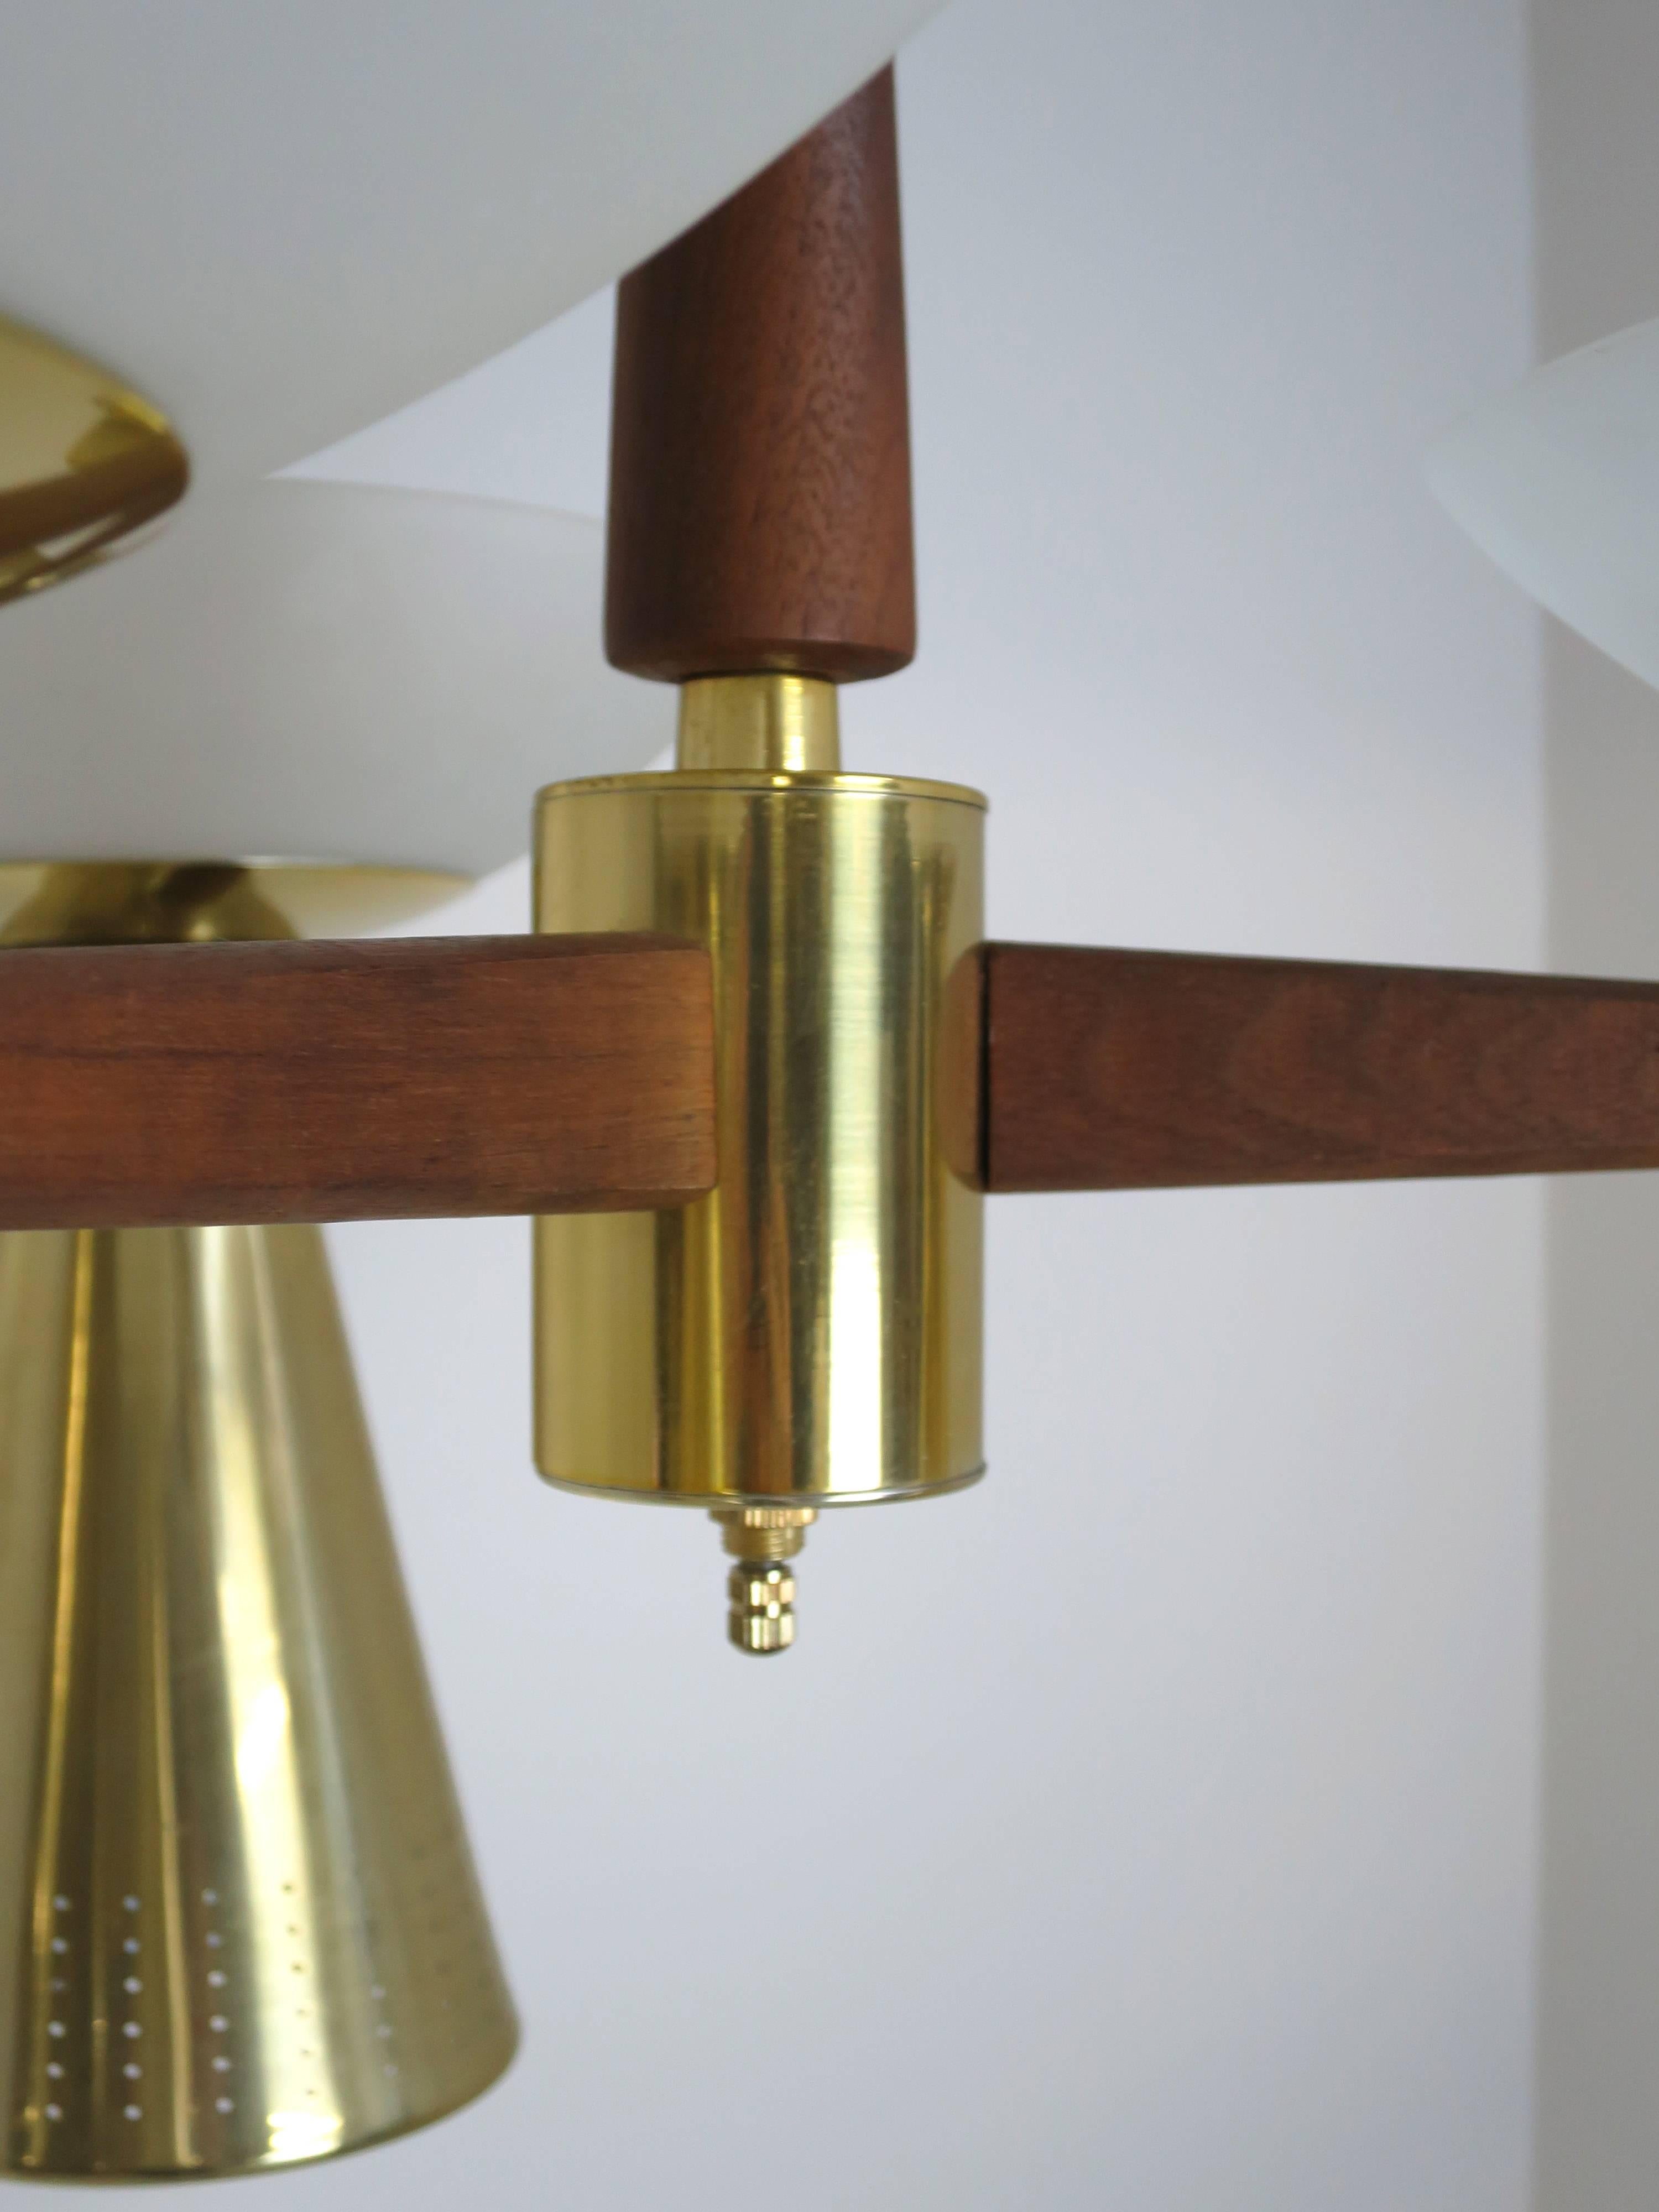 Mid-20th Century Modernist Perforated Brass and Walnut Chandelier, circa 1960s For Sale